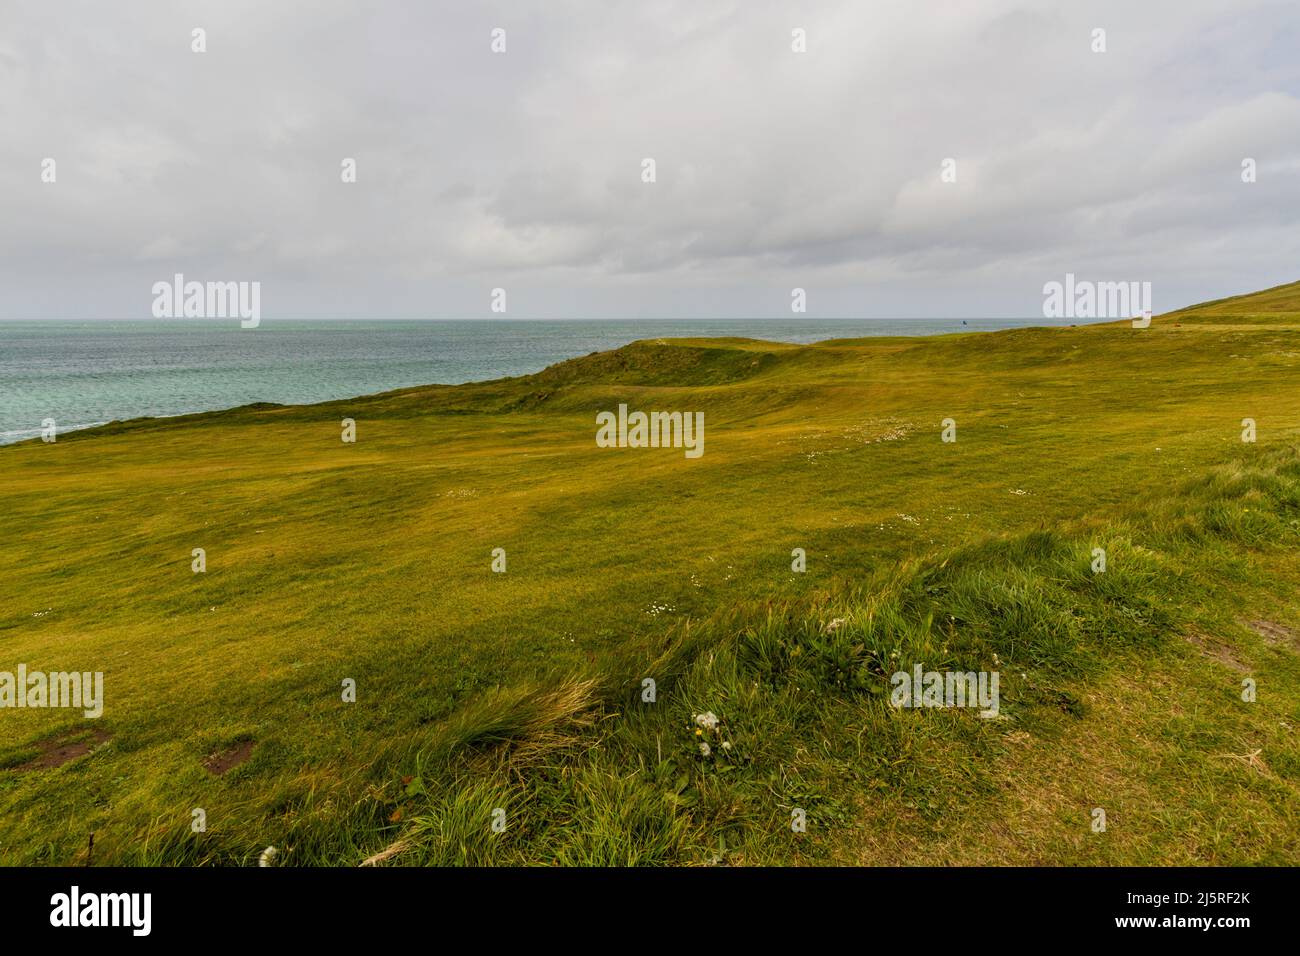 View over the golf course at Porthdinllaen, North Wales, landscape. Stock Photo